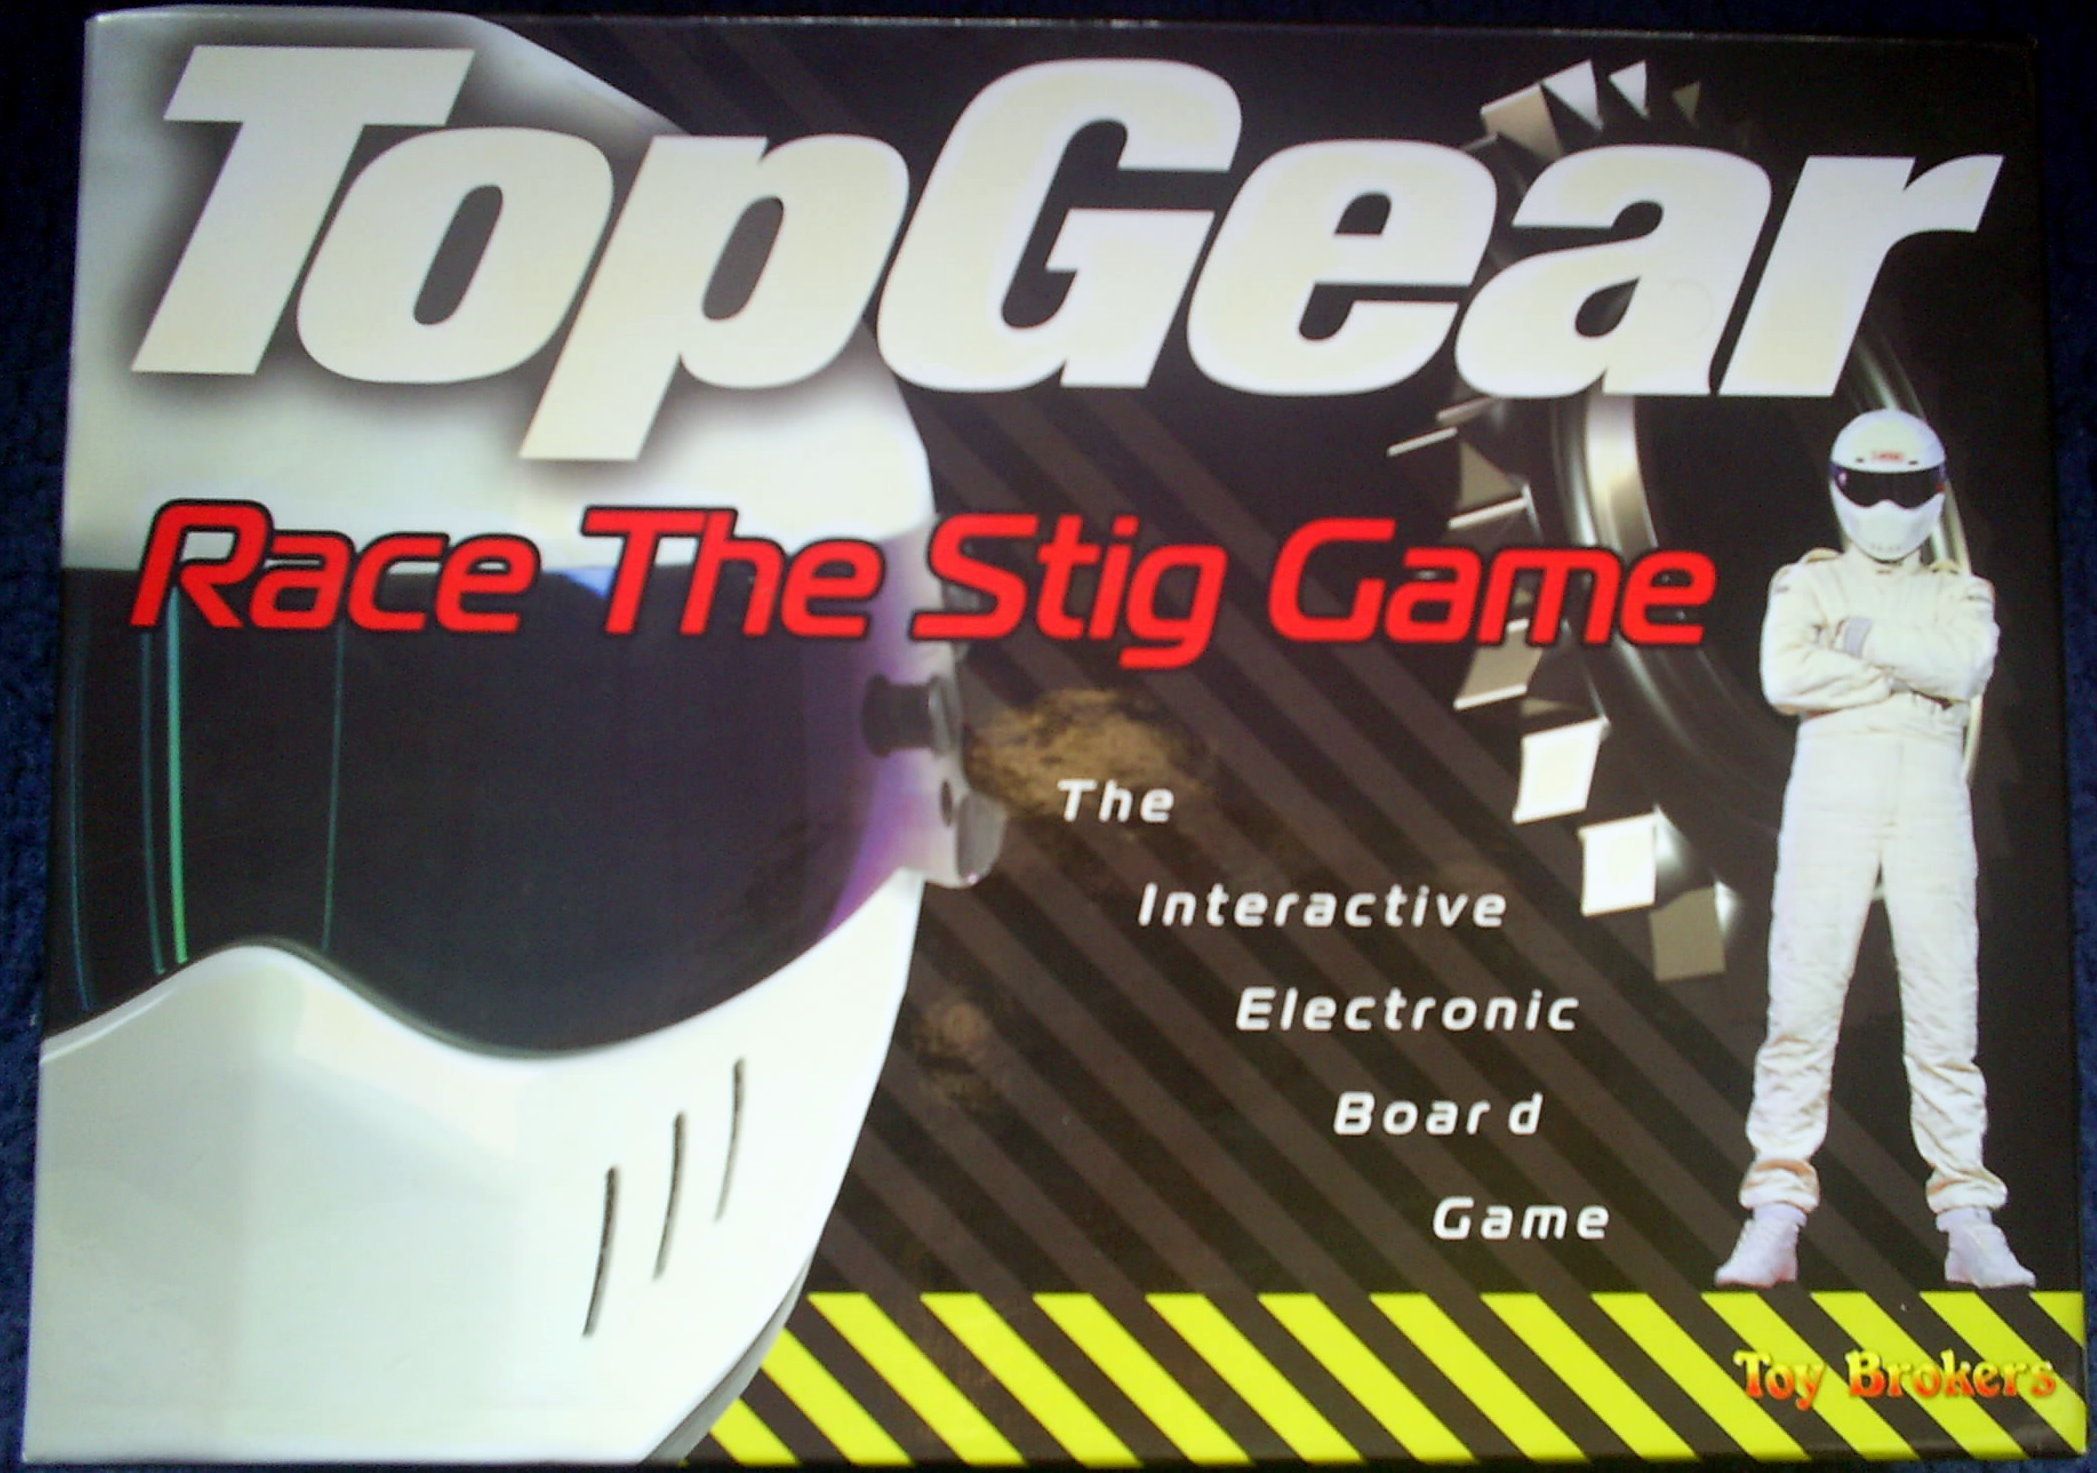 Top Gear Race the Stig game